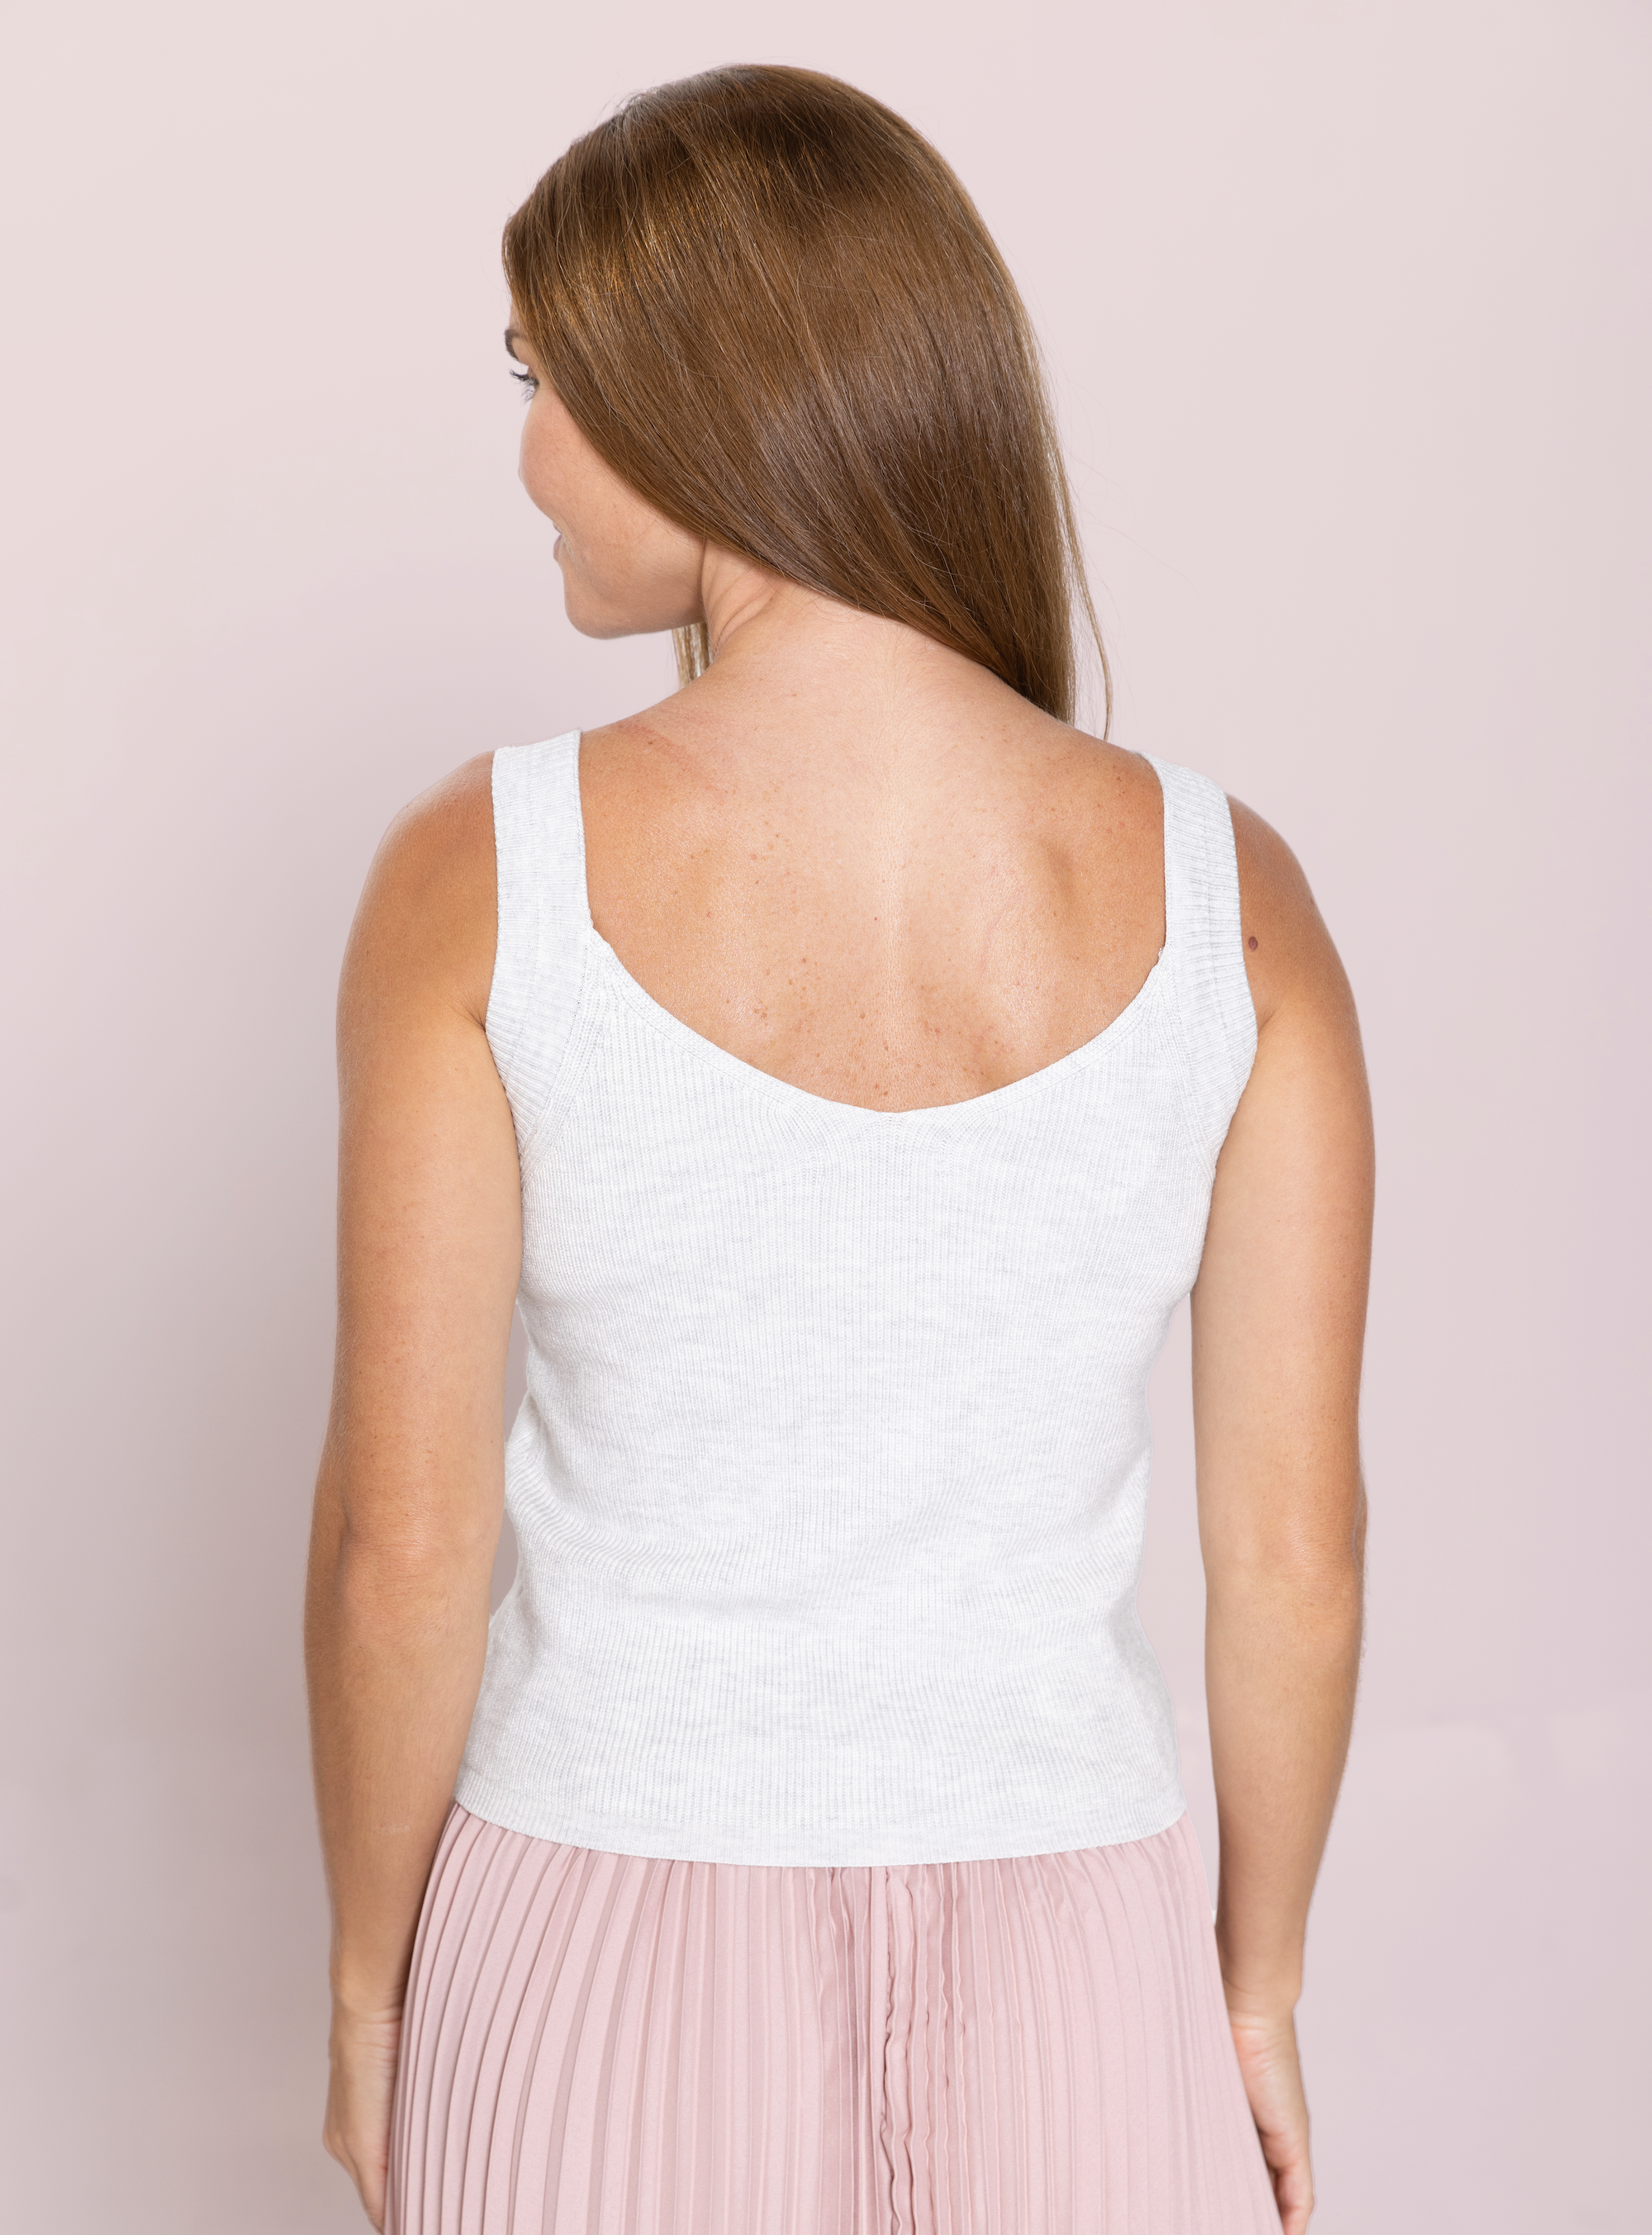 Nuzzle Clothing Shirts & Tops Knit Tank in Silver